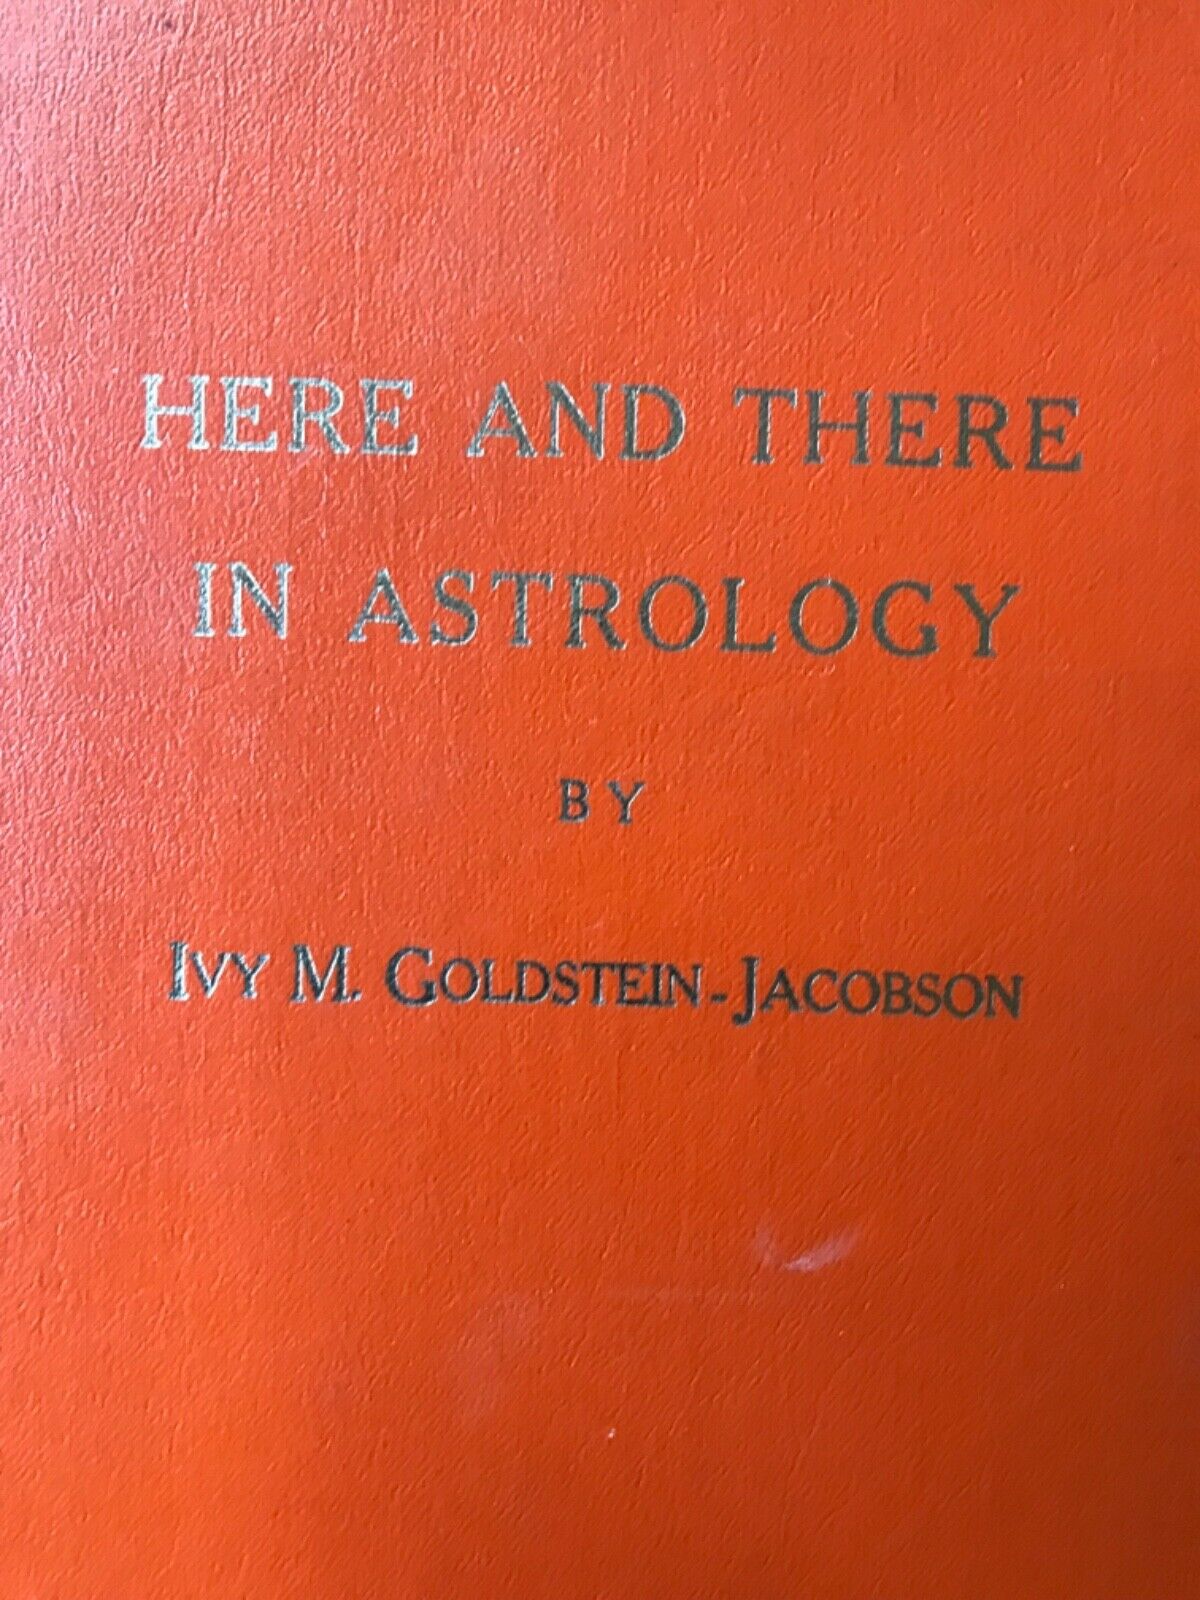 Here And There In Astrology By Ivy Goldstein-jacobson 1964 Reprint, A Classic!